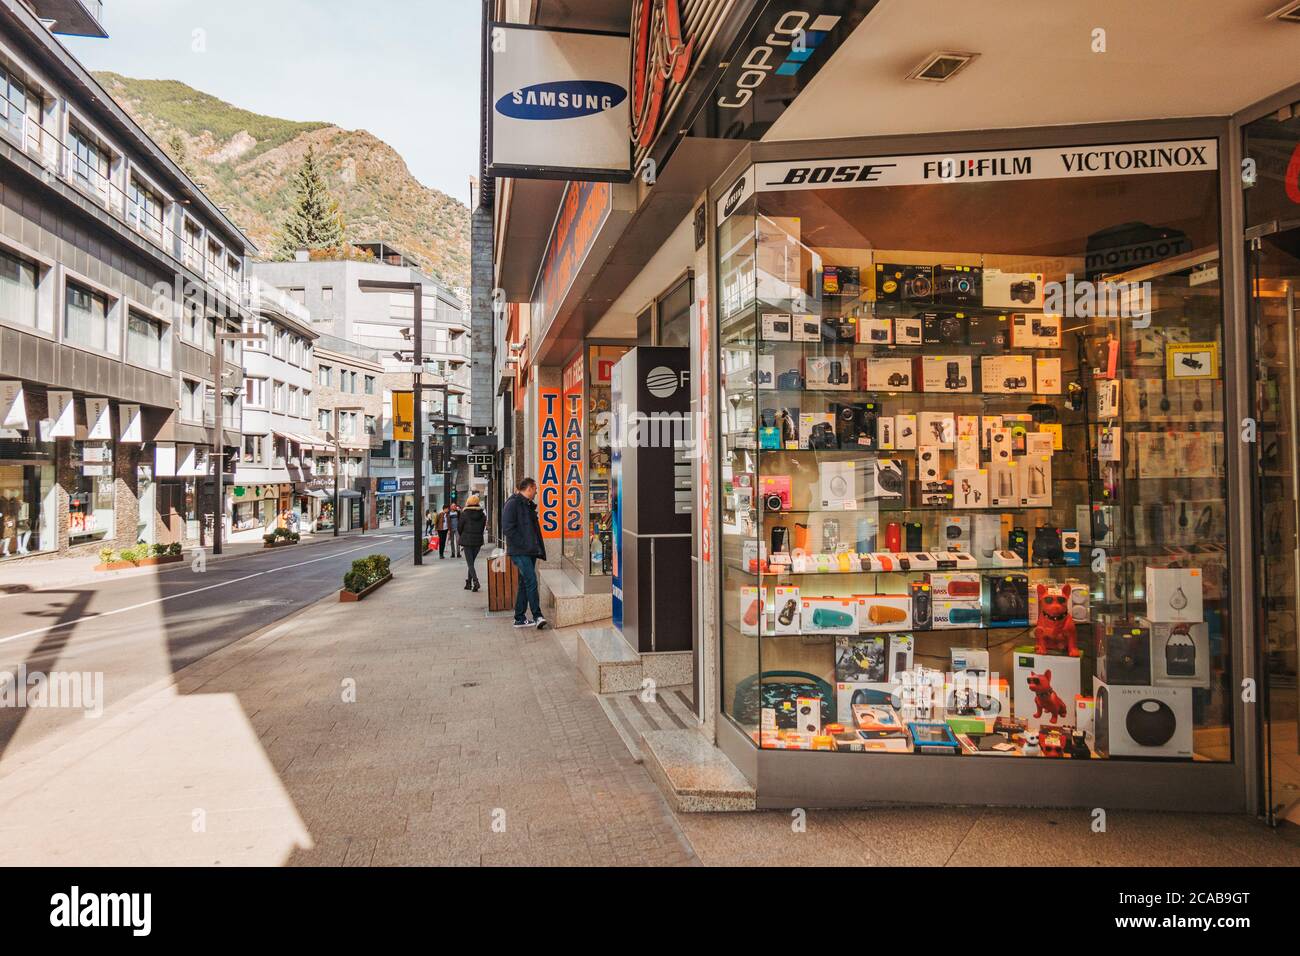 An electronics store in Andorra la Vella. Andorra is a popular location to acquire duty free goods in the Europe, with no tariffs and VAT at just 4.5% Stock Photo